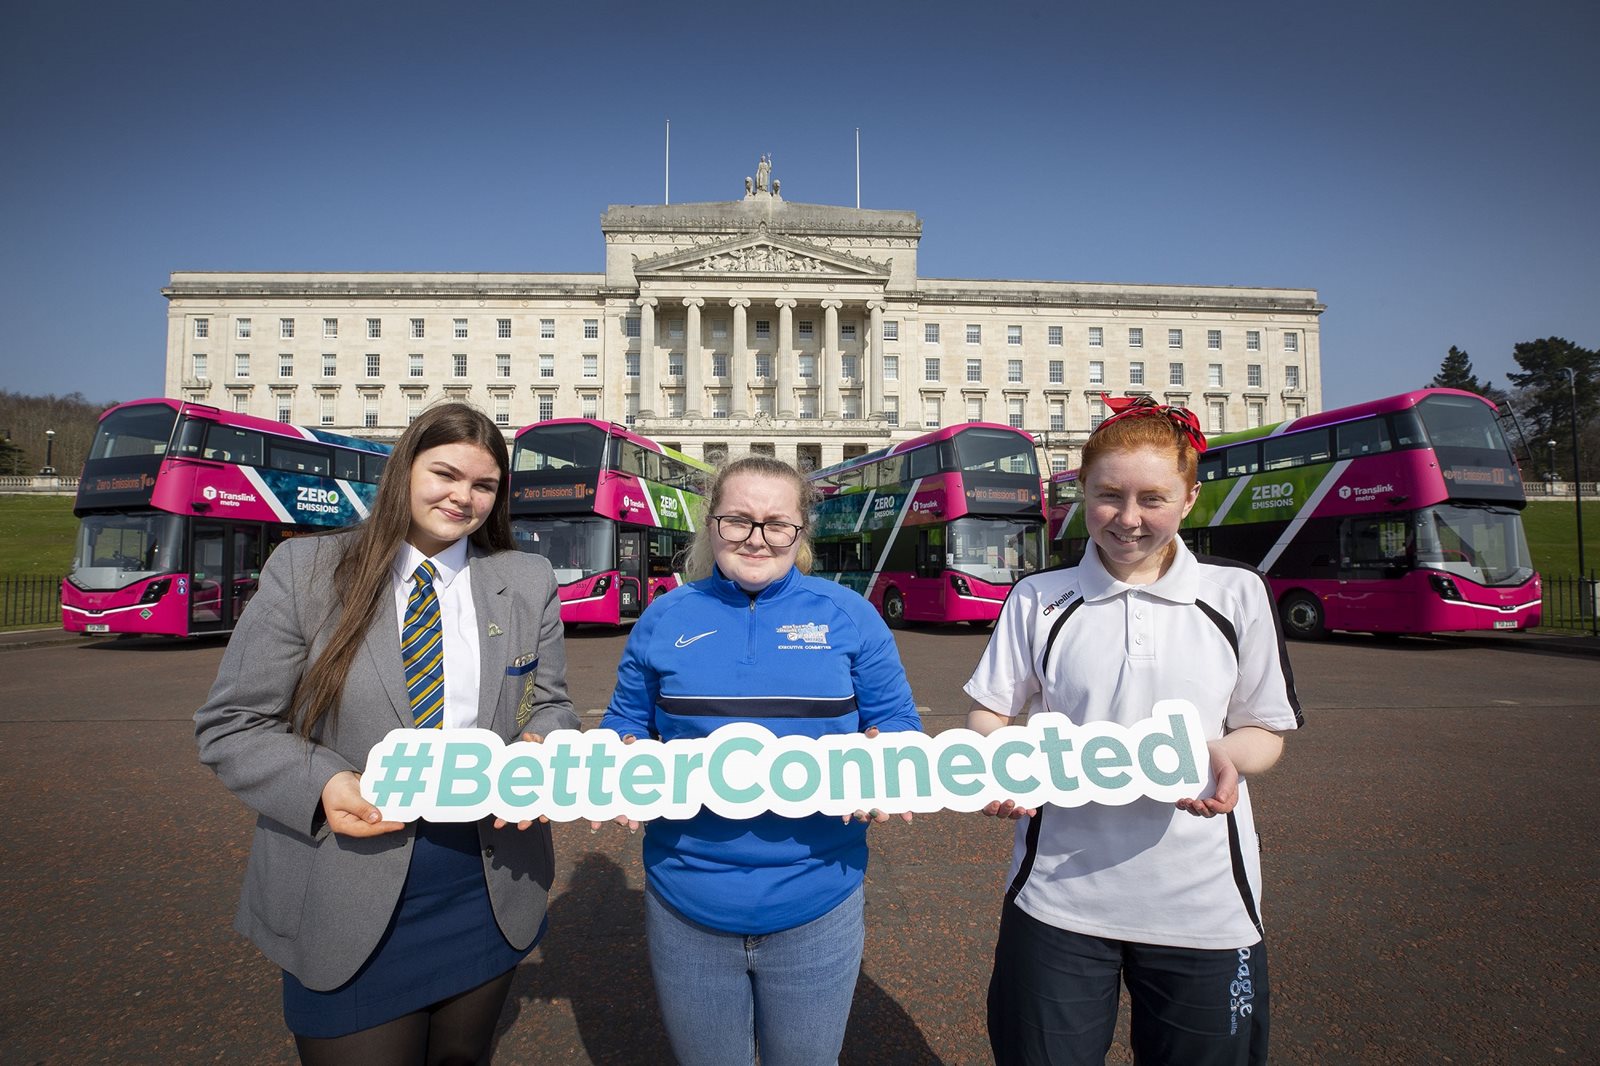 Clare, Lauren and Becky at the Translink Zero Emission buses at Stormont holding the Better Connected sign